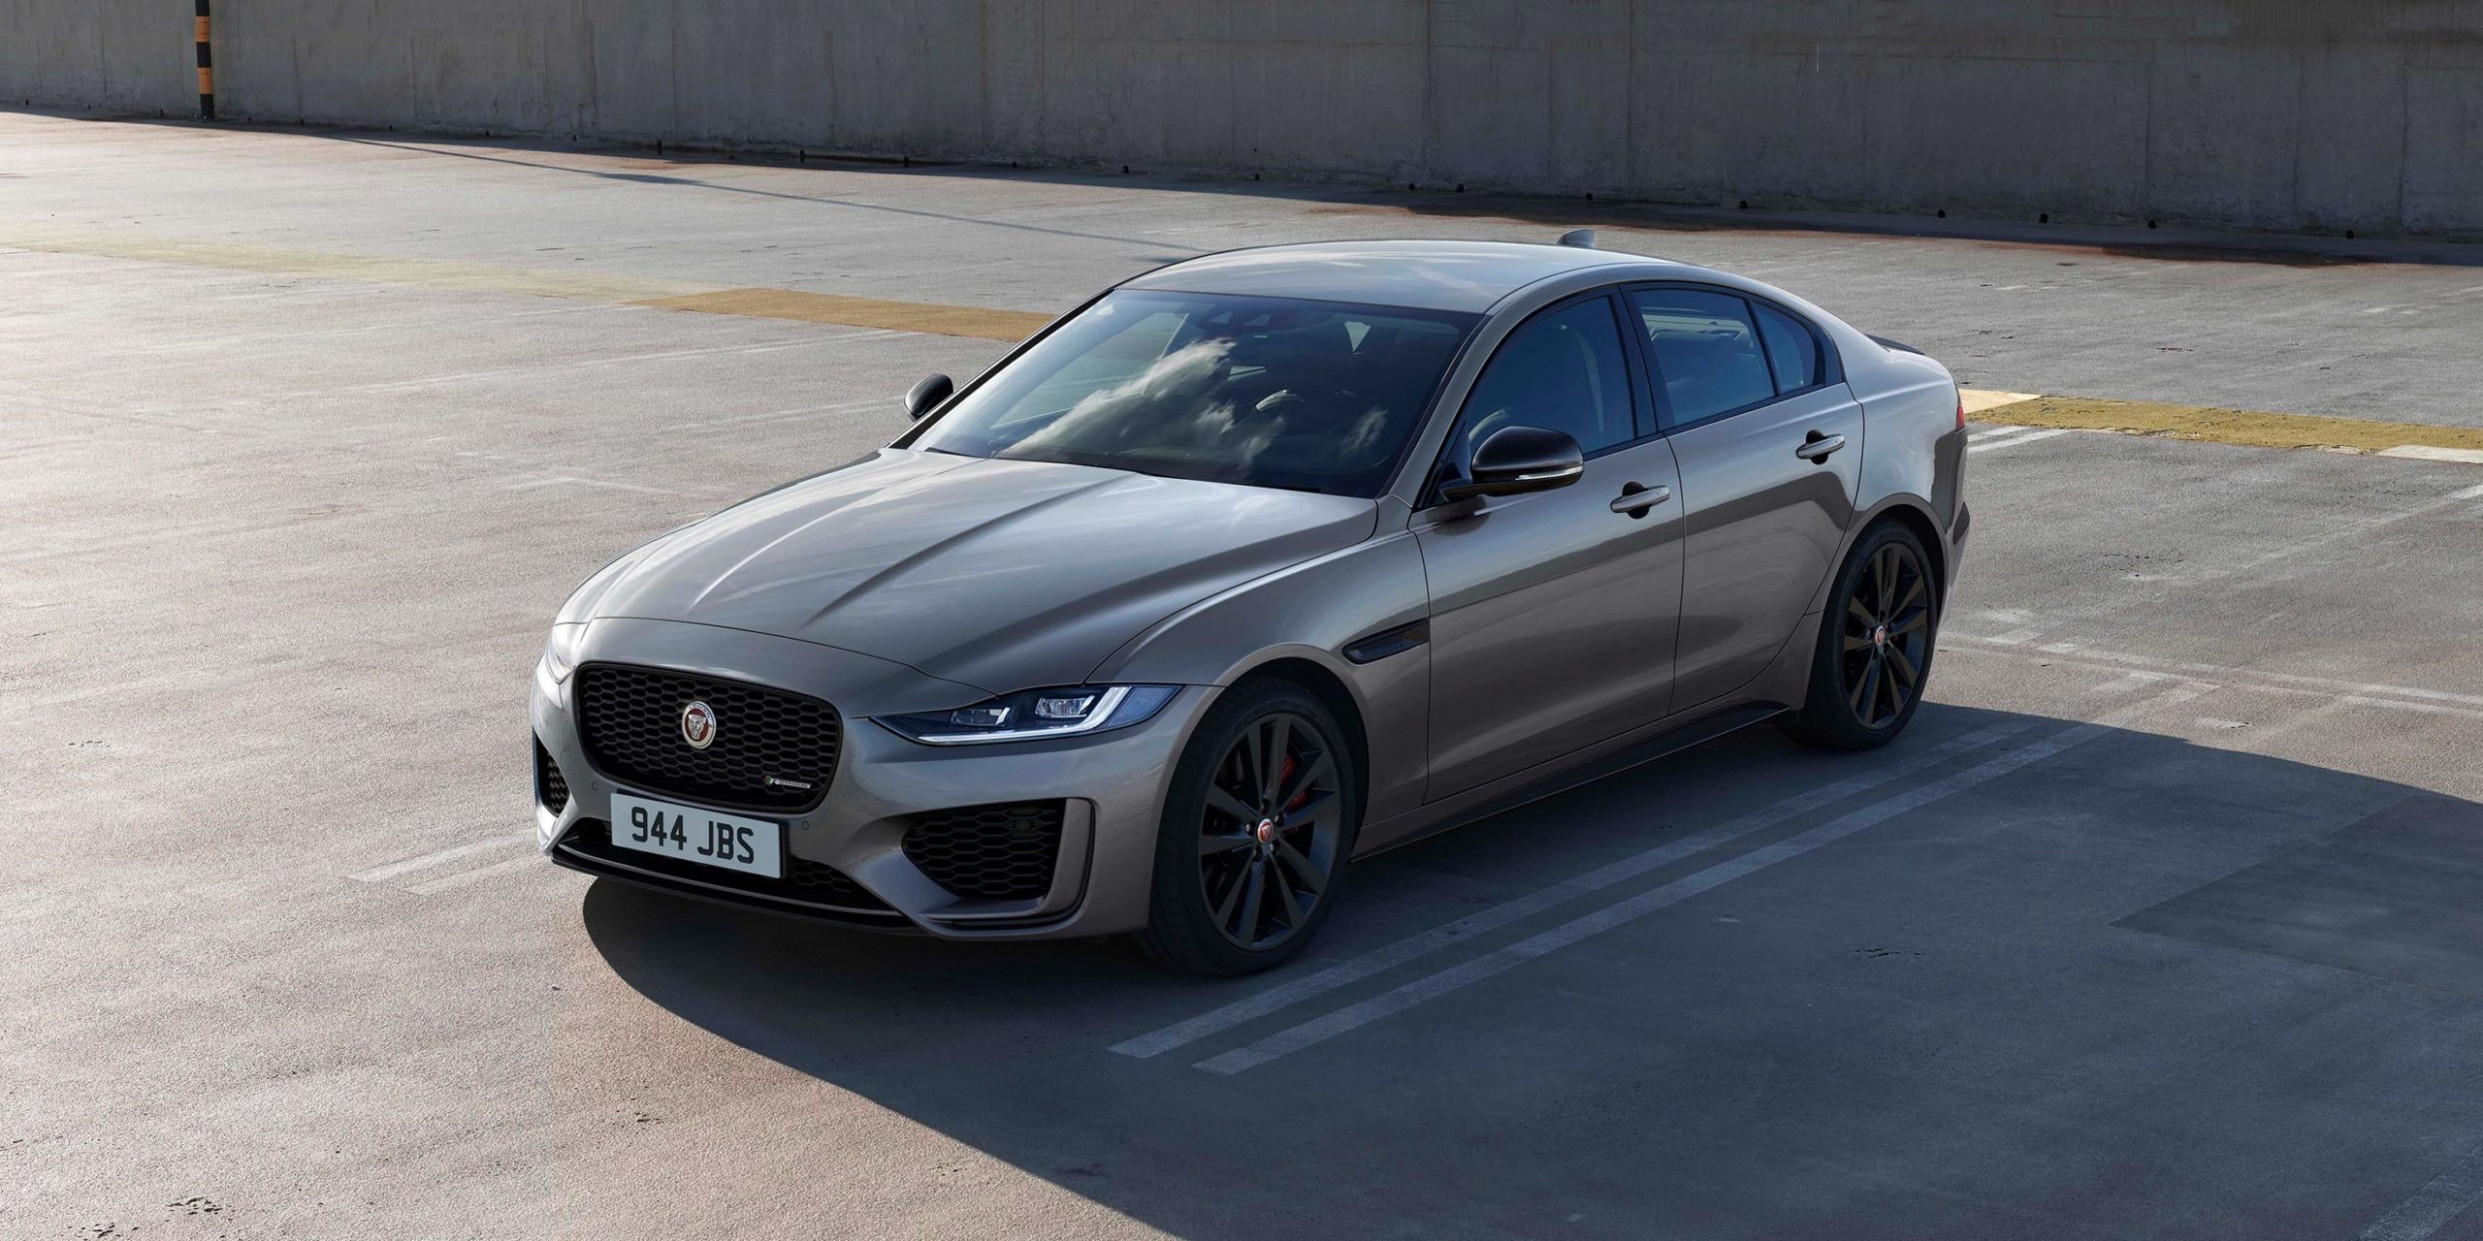 Redesign and Concept 2022 Jaguar Xe Release Date